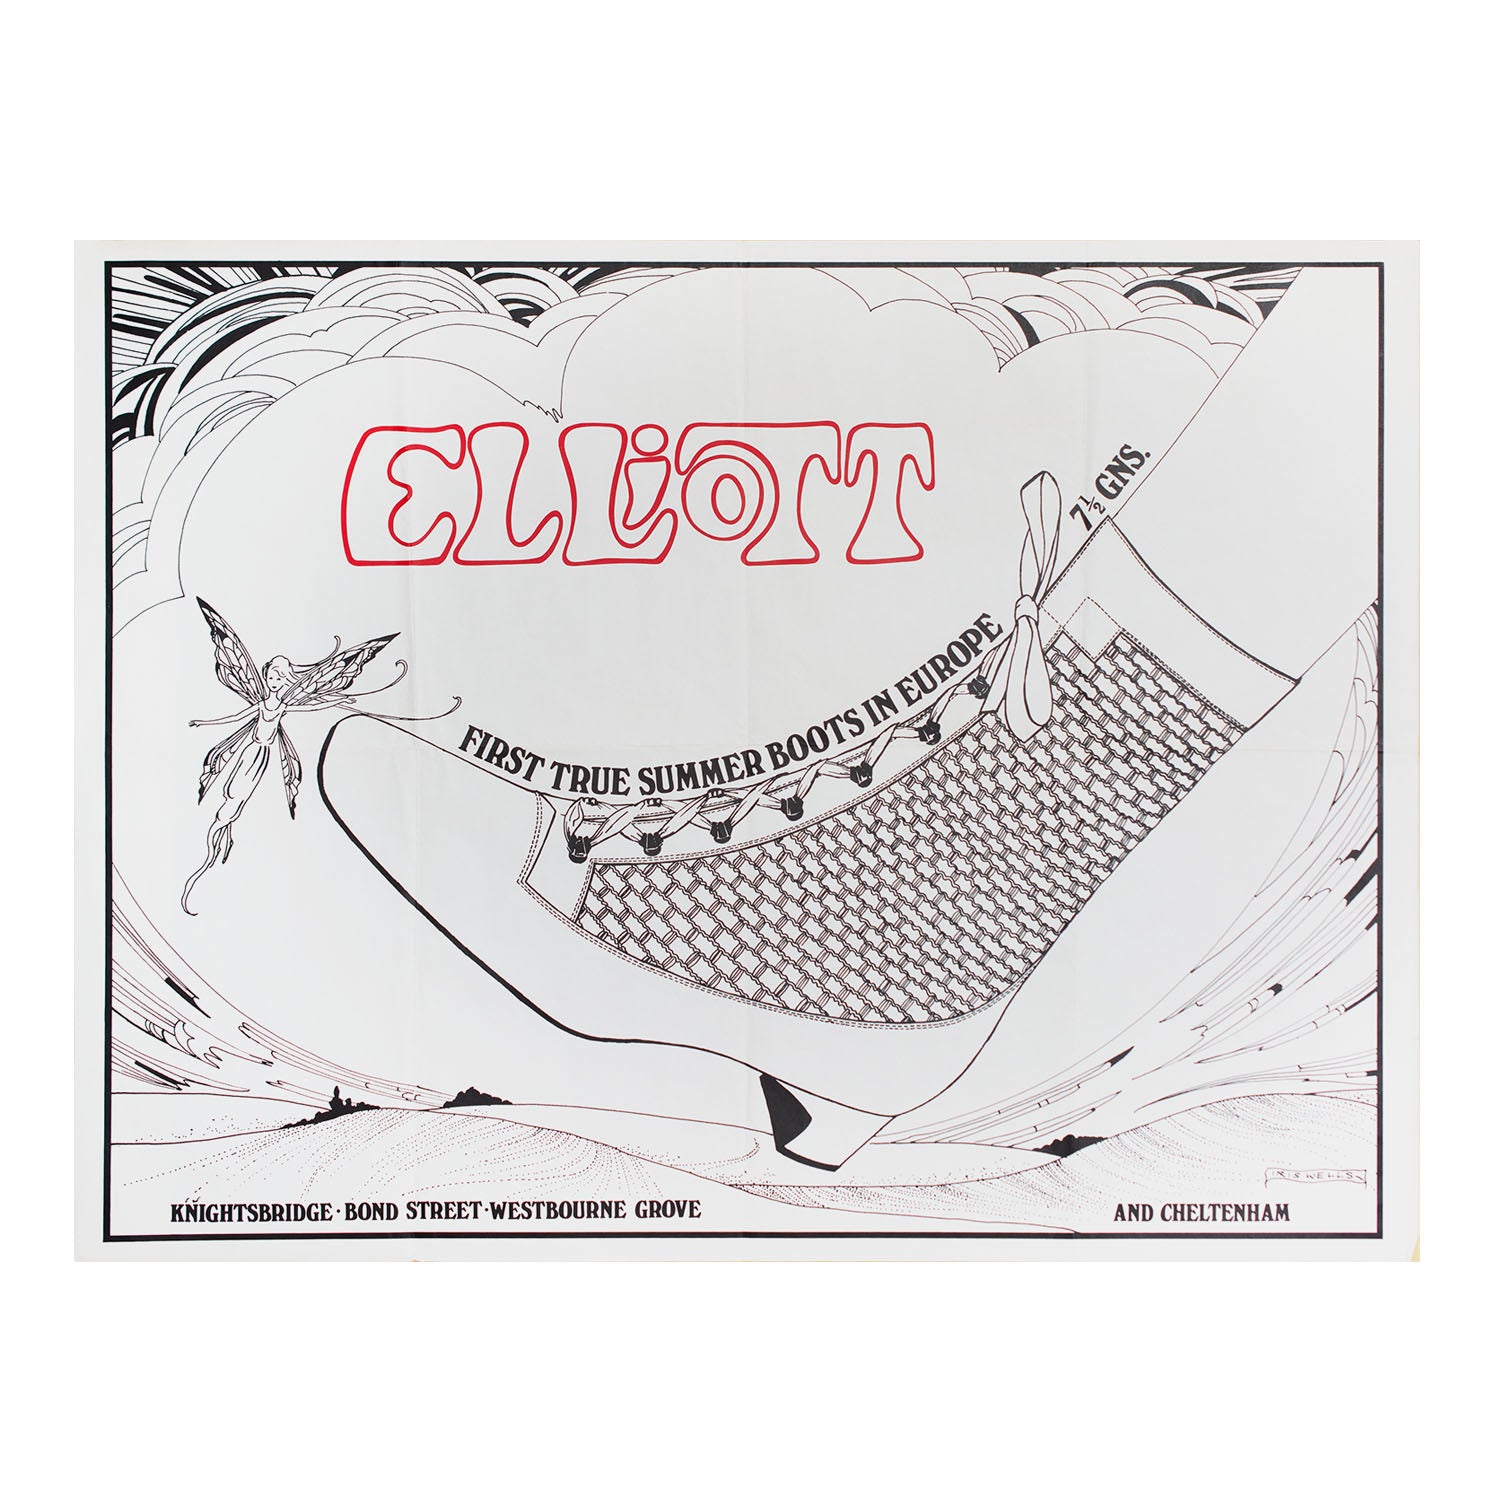 An original poster: First True Summer Boots in Europe, designed by Iris Wells in c.1966/67 for Elliott shoes. The poster depicts a lace up 'Summer Boot' in stencil with a small fairy. 